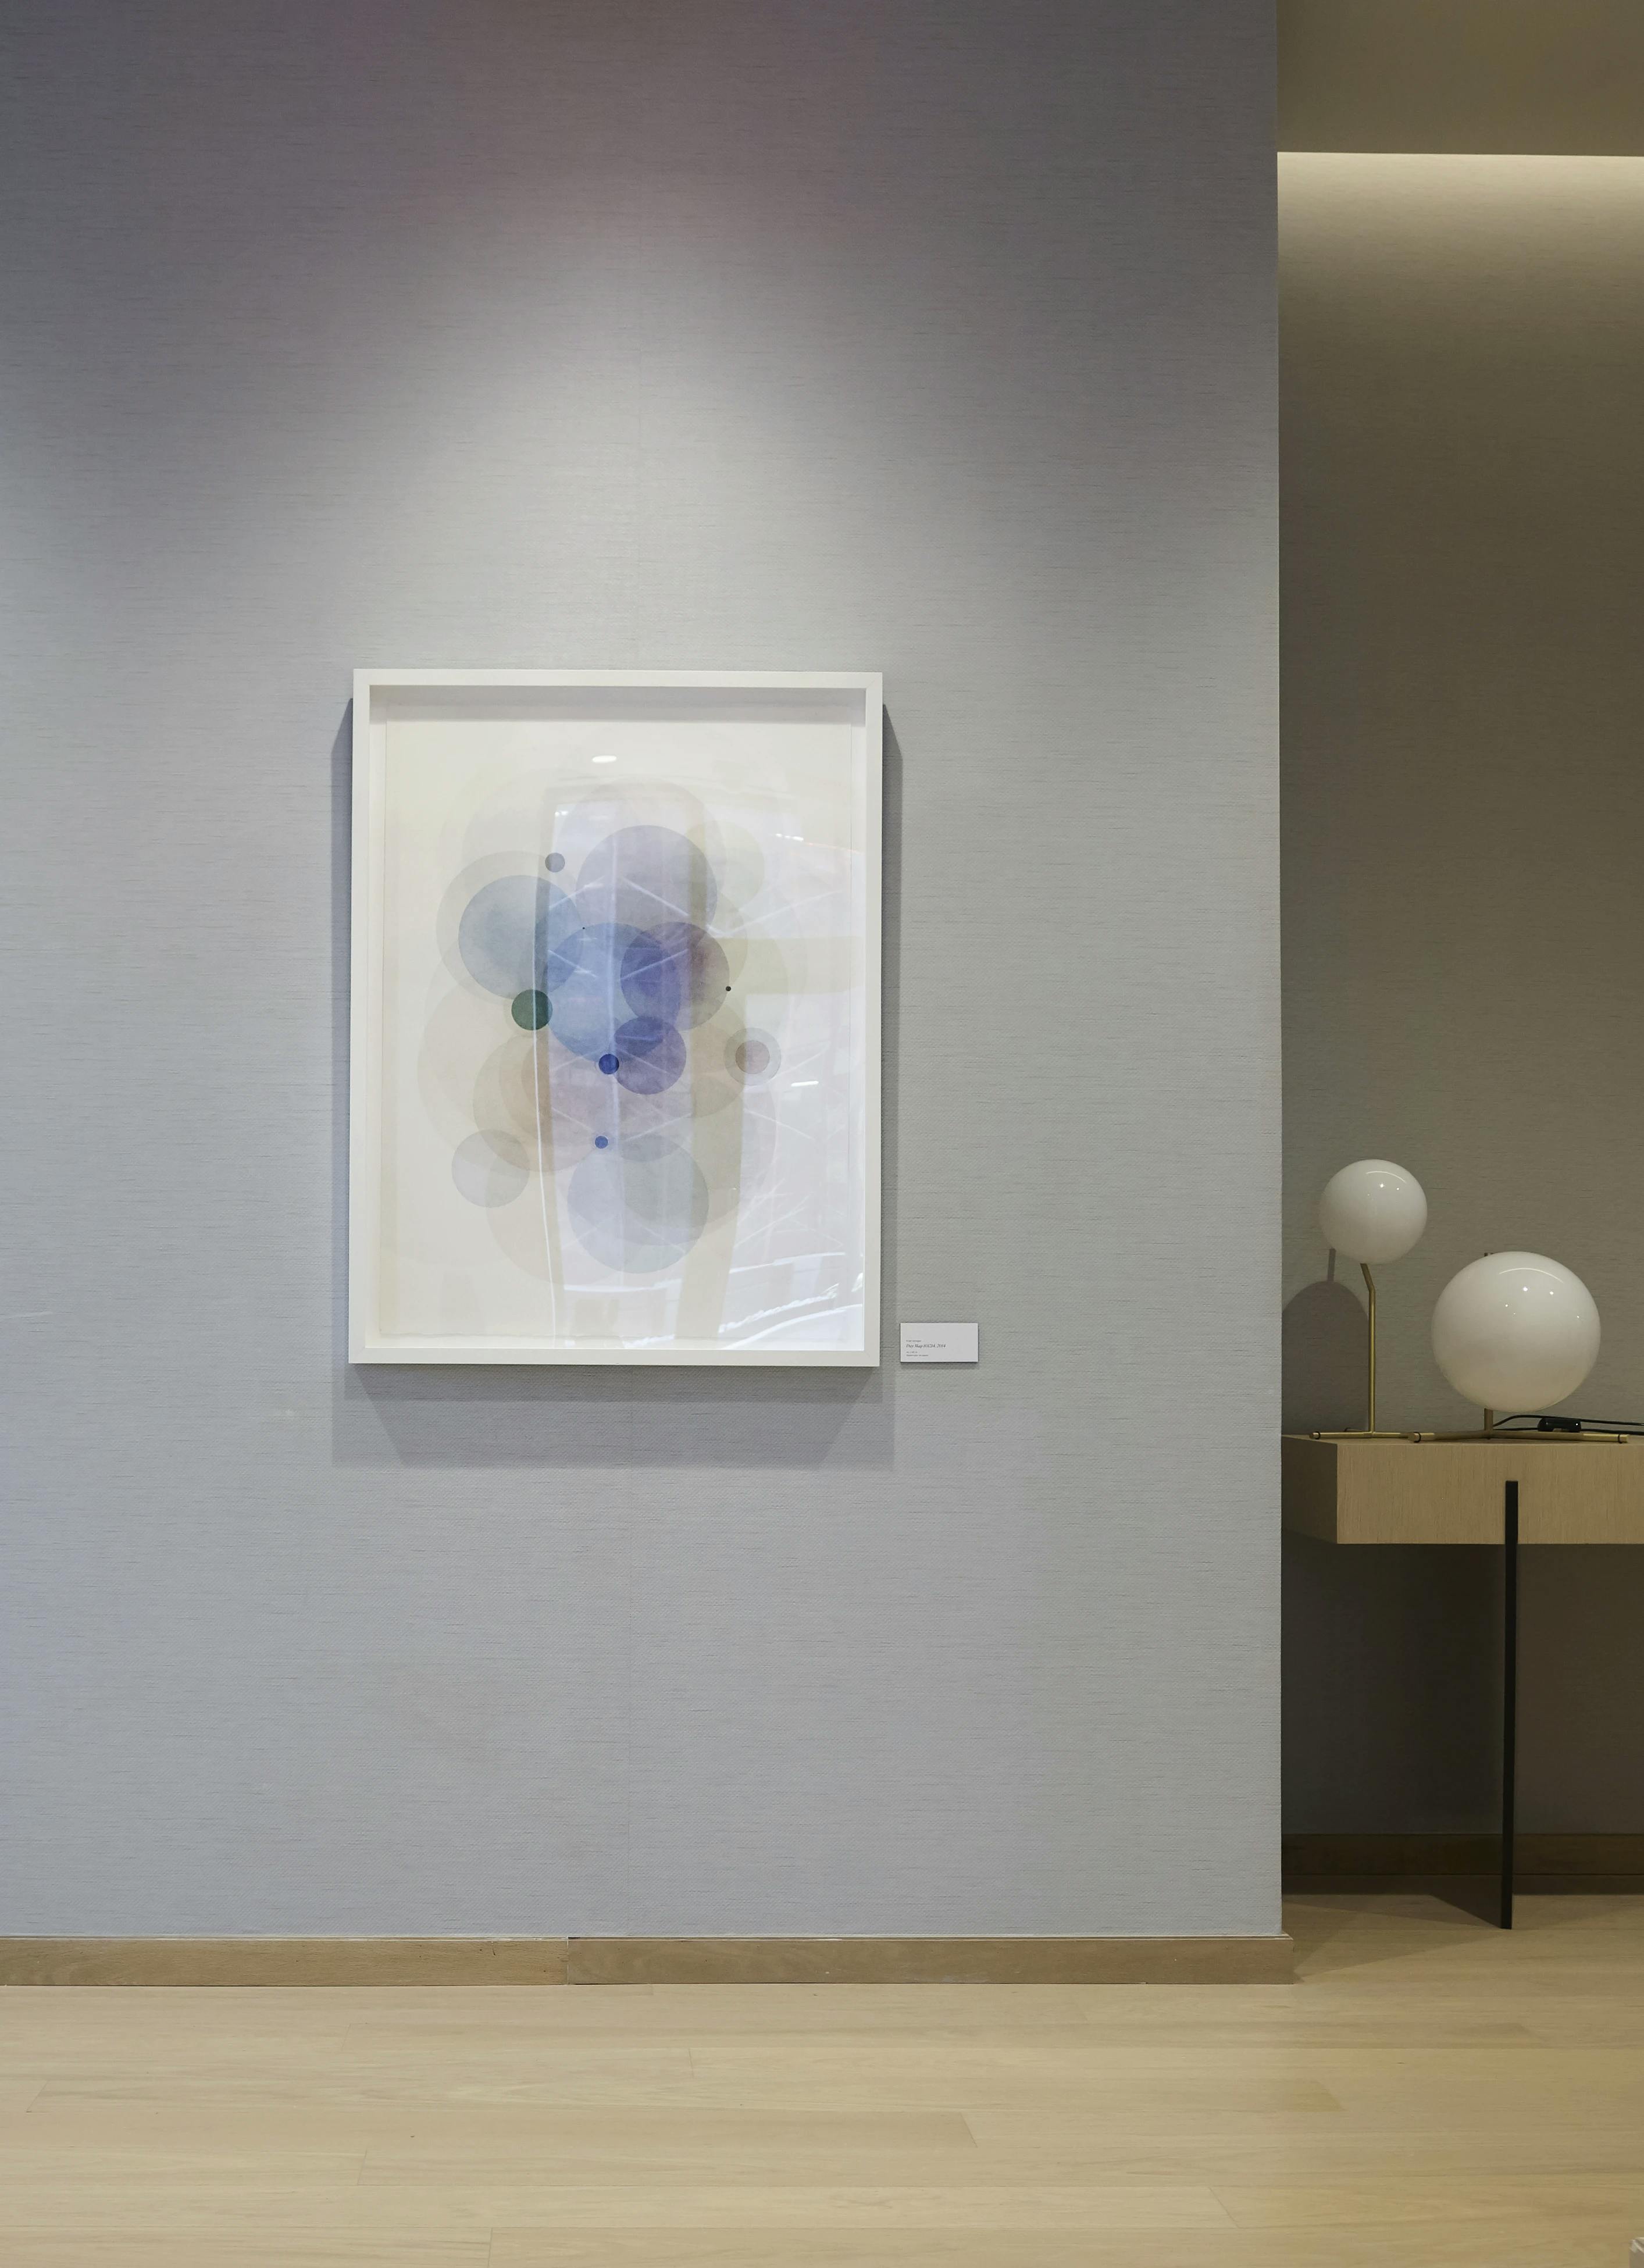 Framed artwork with translucent overlapping circles by artist Evan Venegas.